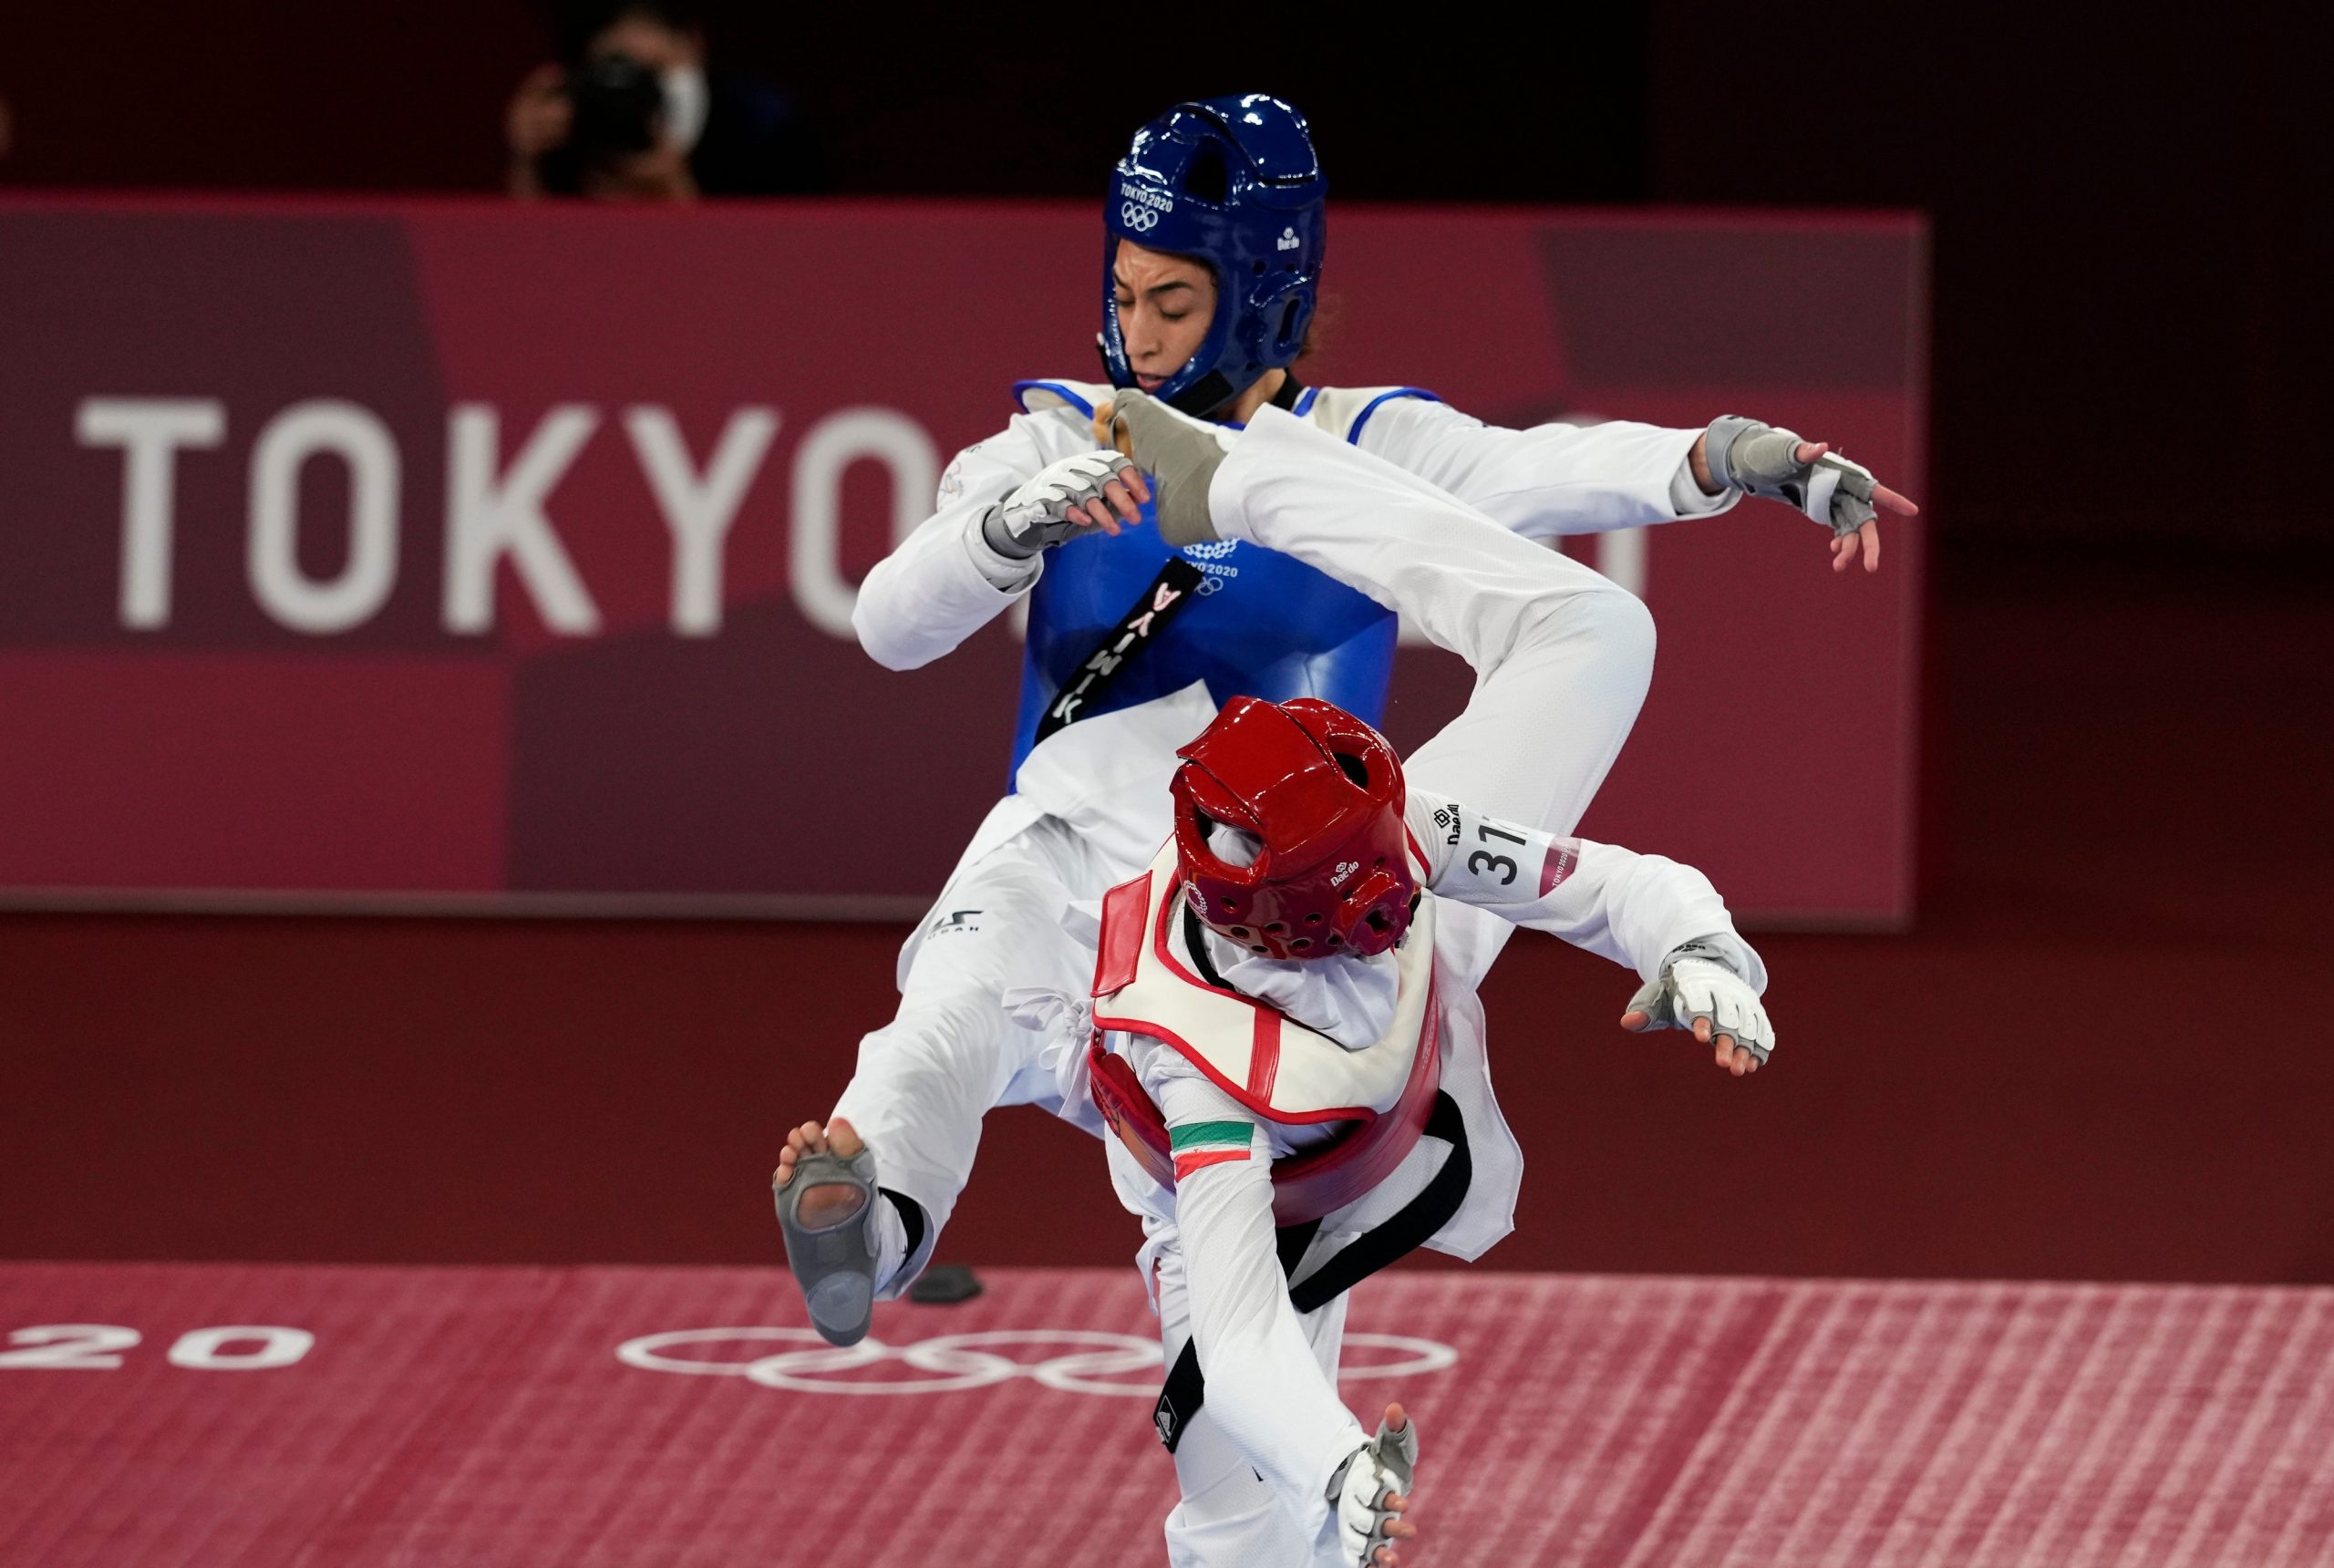 Iran's Nahid Kiyani, front, attacks Kimia Alizadeh, of the Refugee Olympic Team, during the women's 57kg match at the 2020 Summer Olympics, Sunday, July 25, 2021, in Tokyo, Japan.